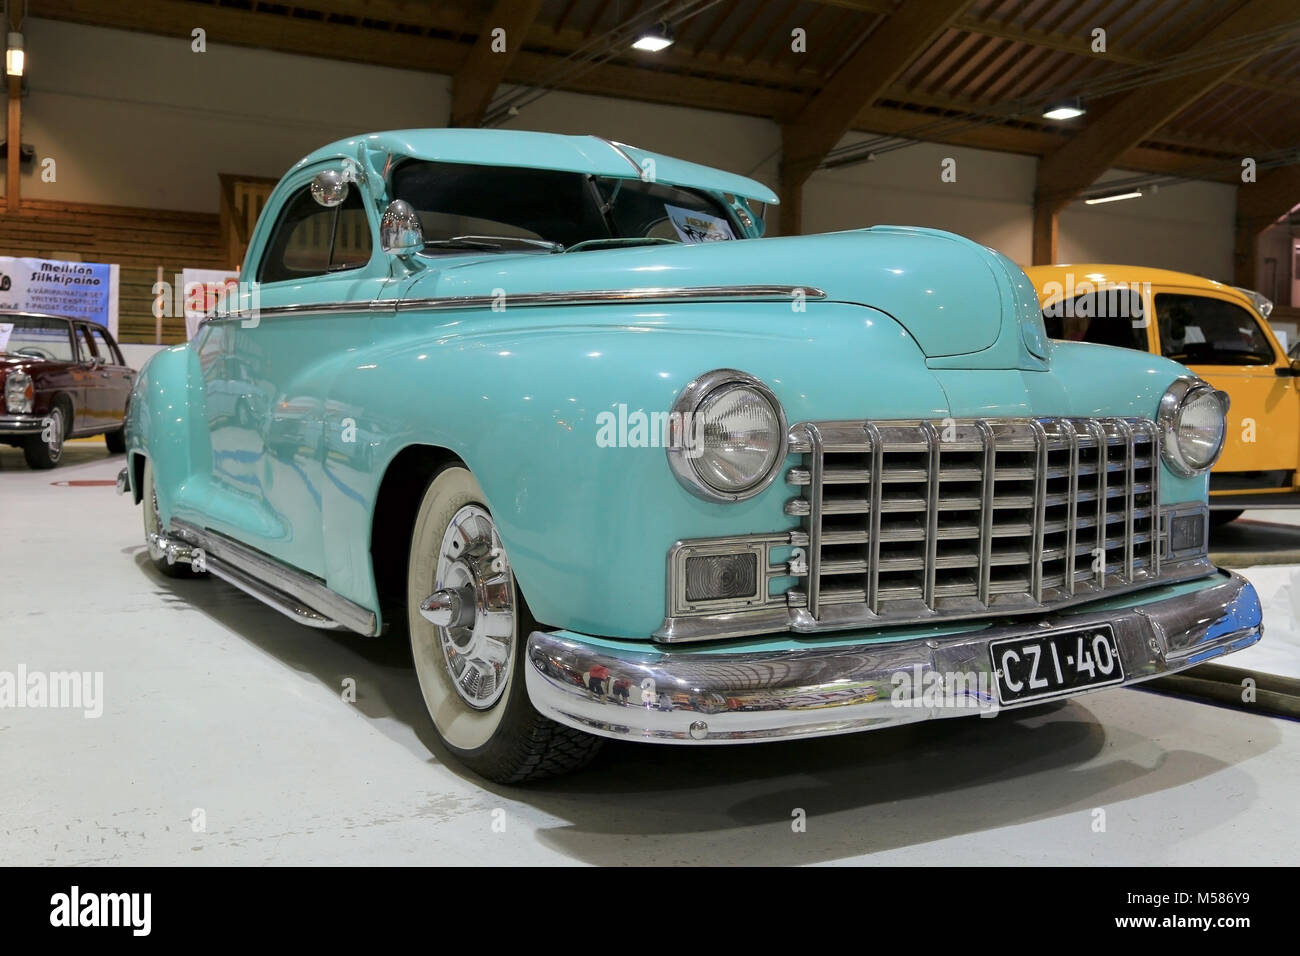 LOIMAA, FINLAND - JUNE 15, 2014: Mint green Dodge Business Coupe 1946 vintage car presented at HeMa Show 2014 in Loimaa, Finland. Stock Photo